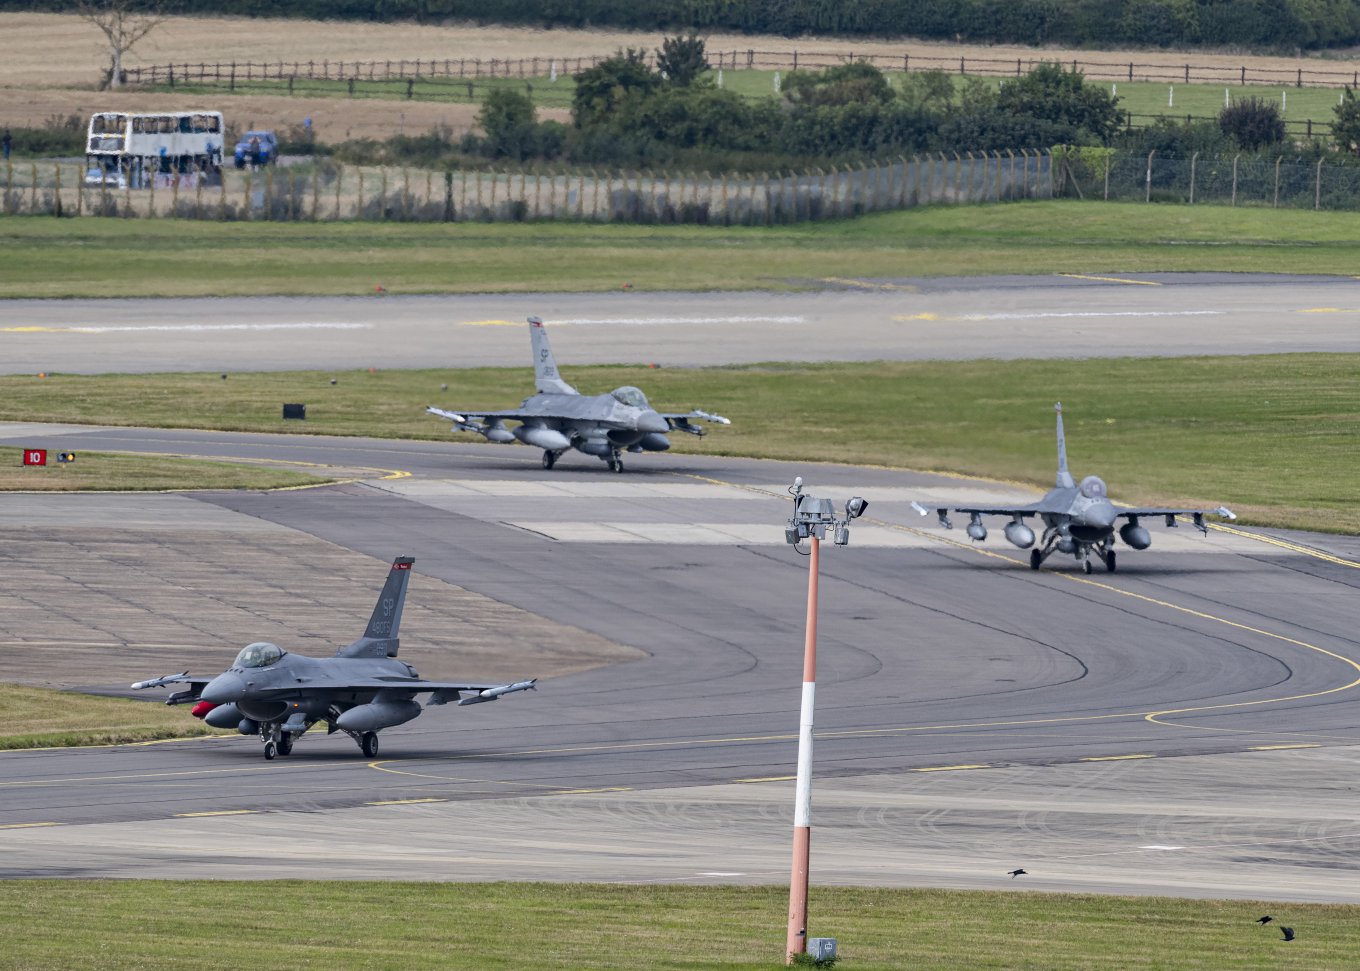 F-16s on a taxiway